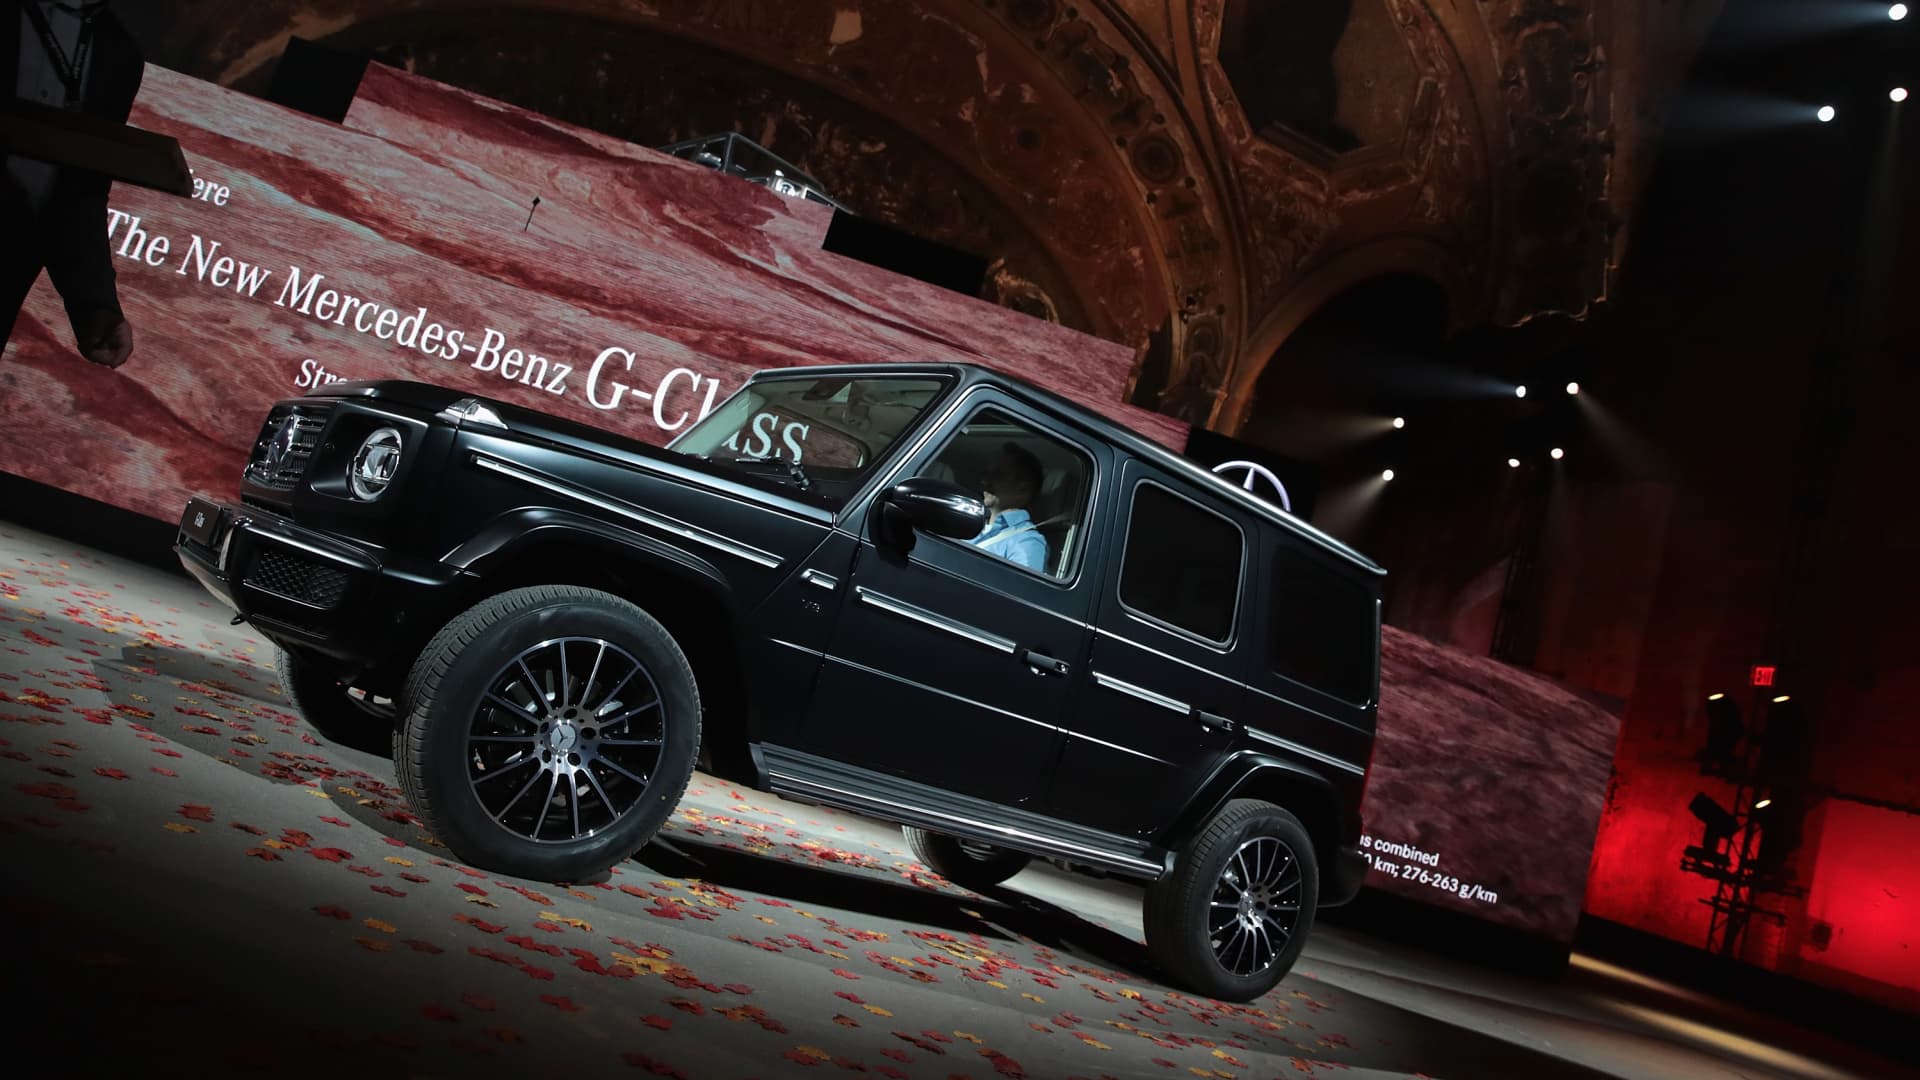 Mercedes to release a smaller version of its G Class luxury SUV